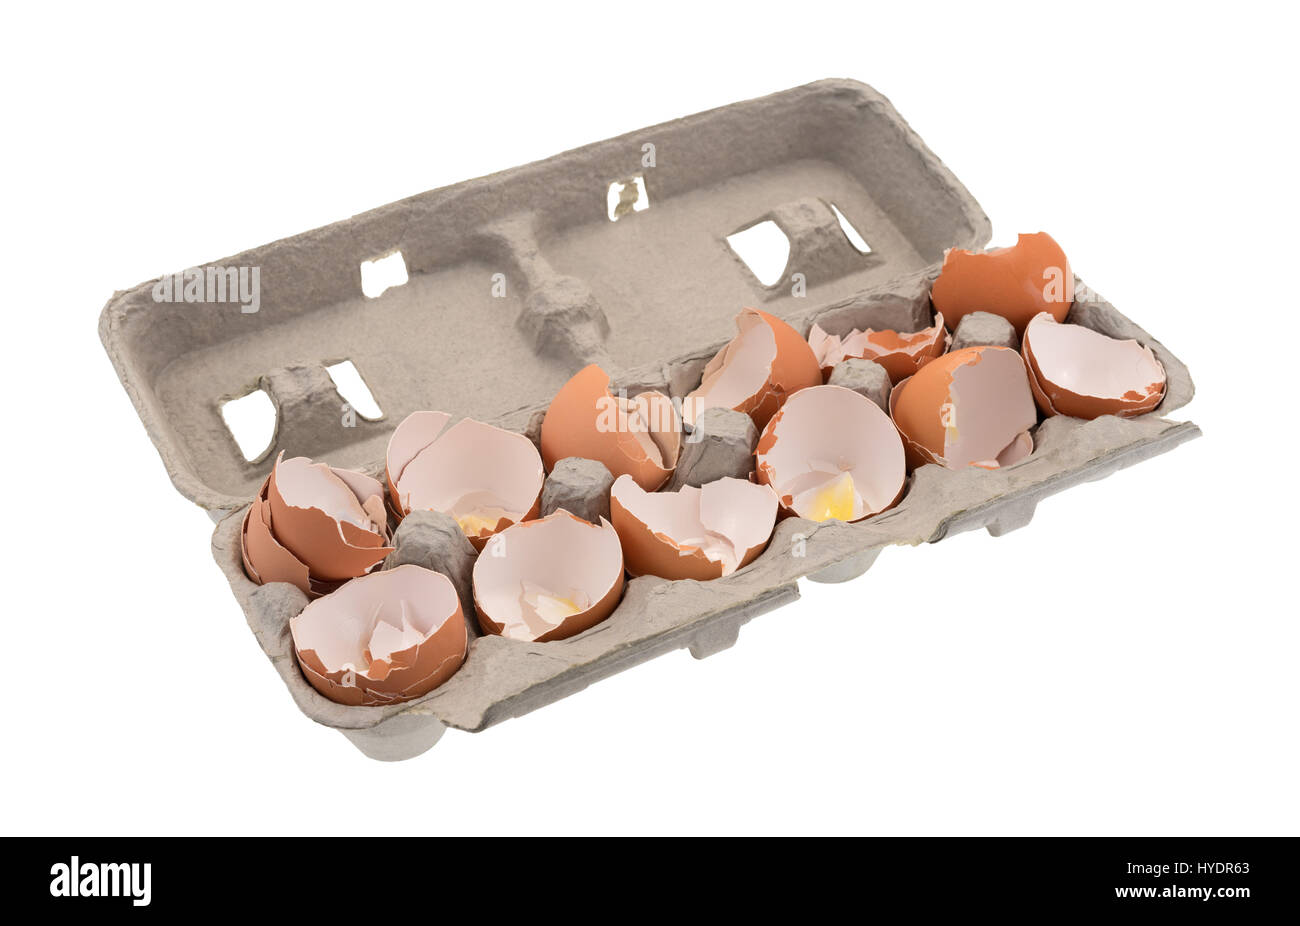 A dozen used egg shells in a cardboard container isolated on a white background. Stock Photo